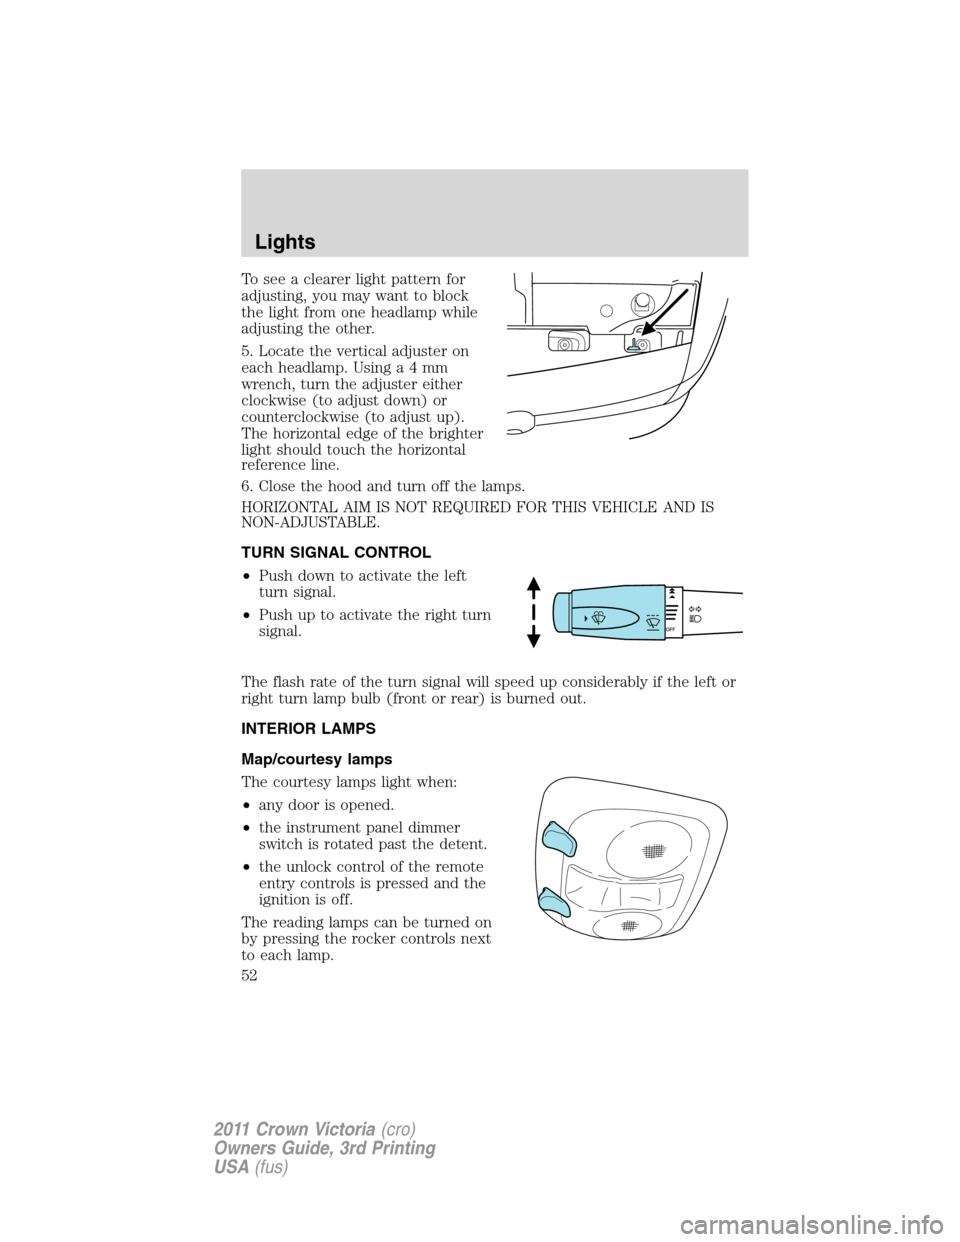 Mercury Grand Marquis 1011  Owners Manuals To see a clearer light pattern for
adjusting, you may want to block
the light from one headlamp while
adjusting the other.
5. Locate the vertical adjuster on
each headlamp. Usinga4mm
wrench, turn the 